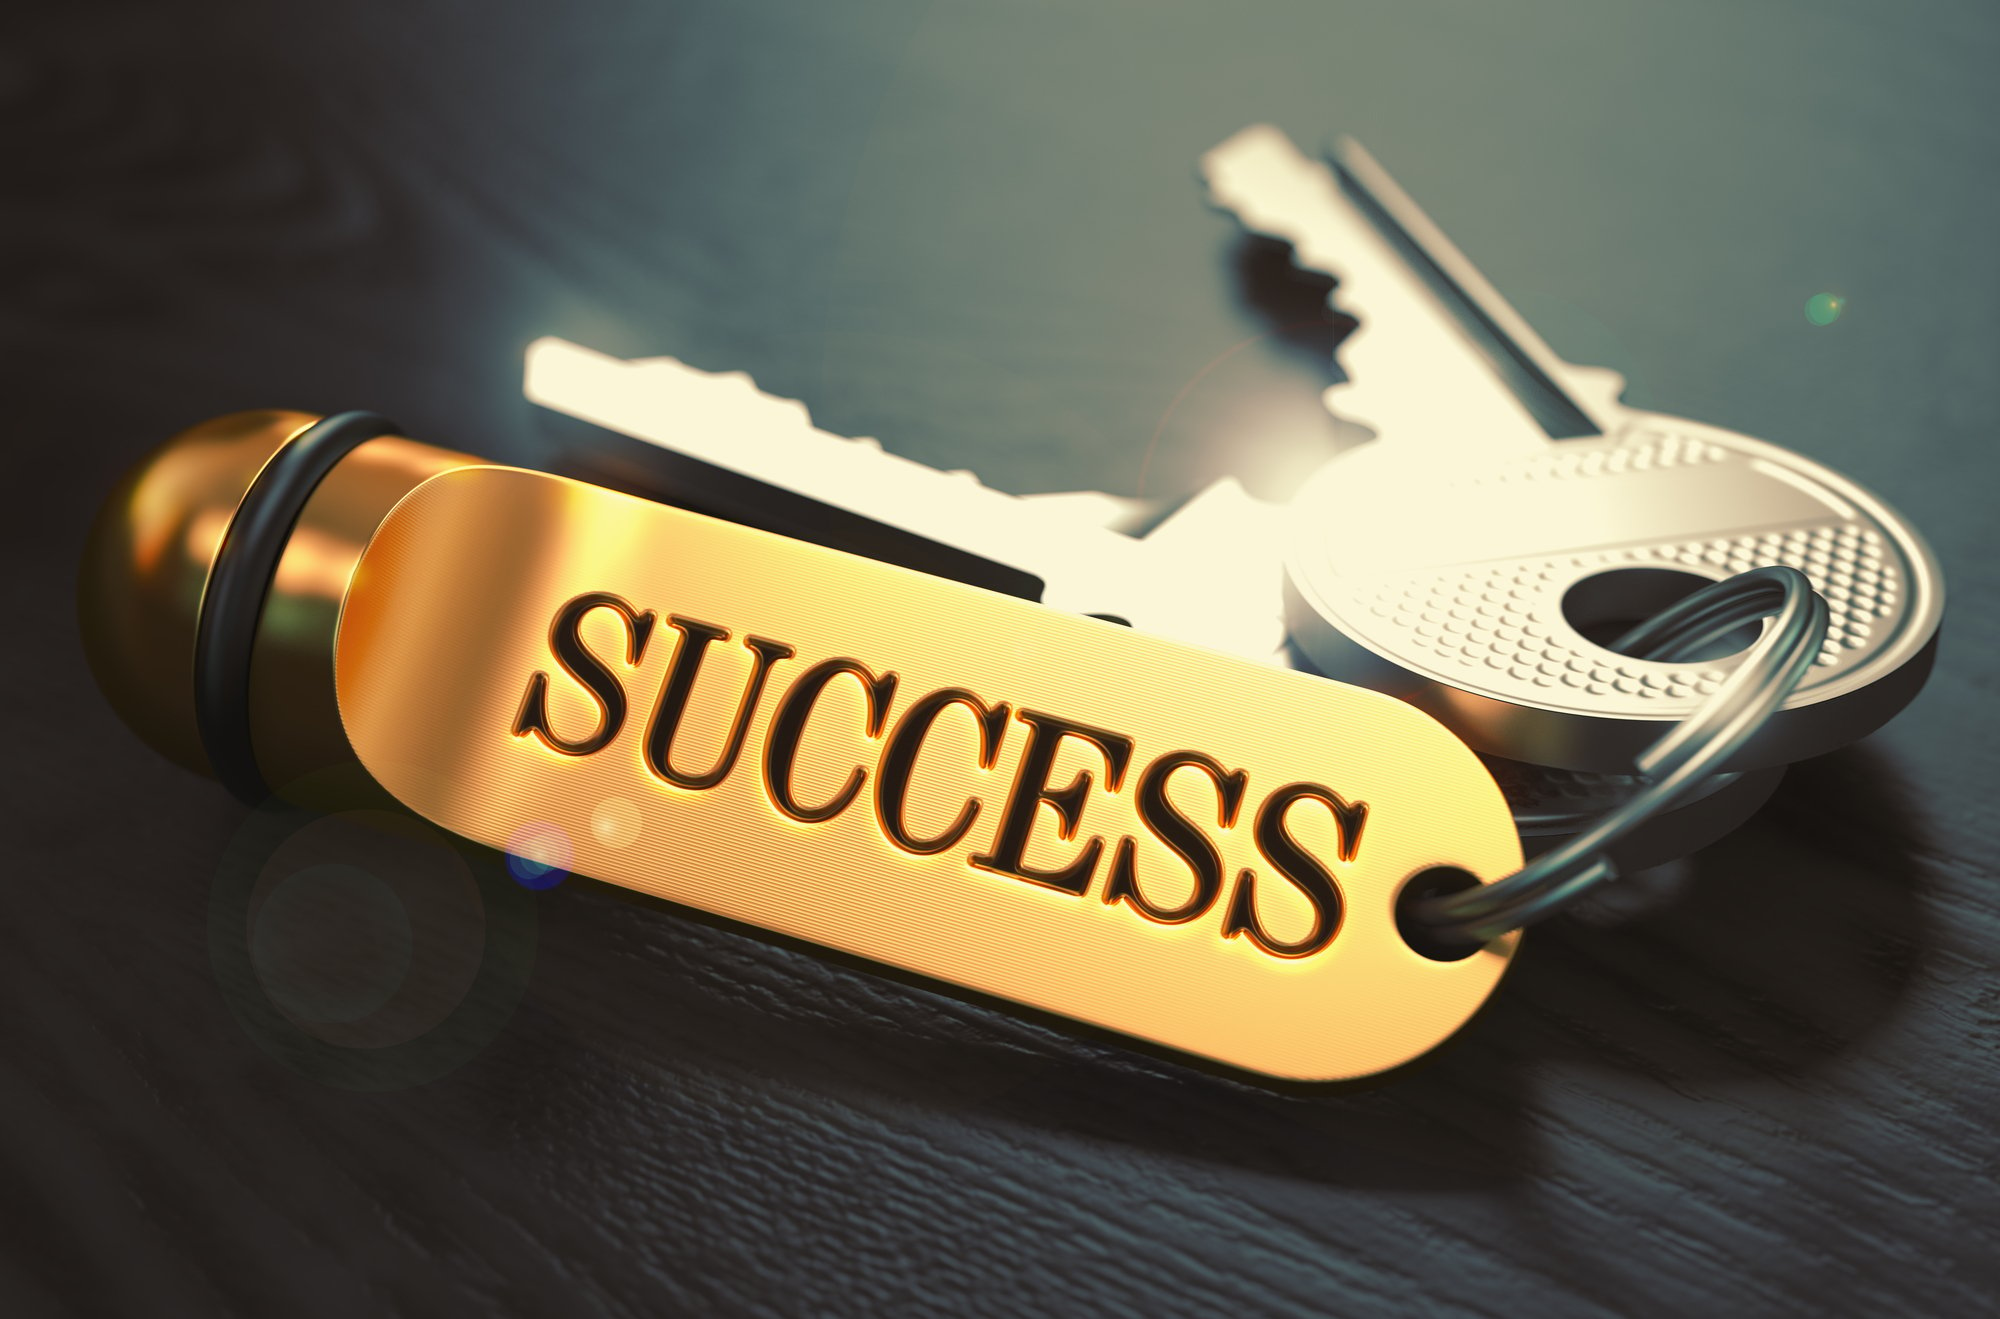 Keys to Success. Concept on Golden Keychain